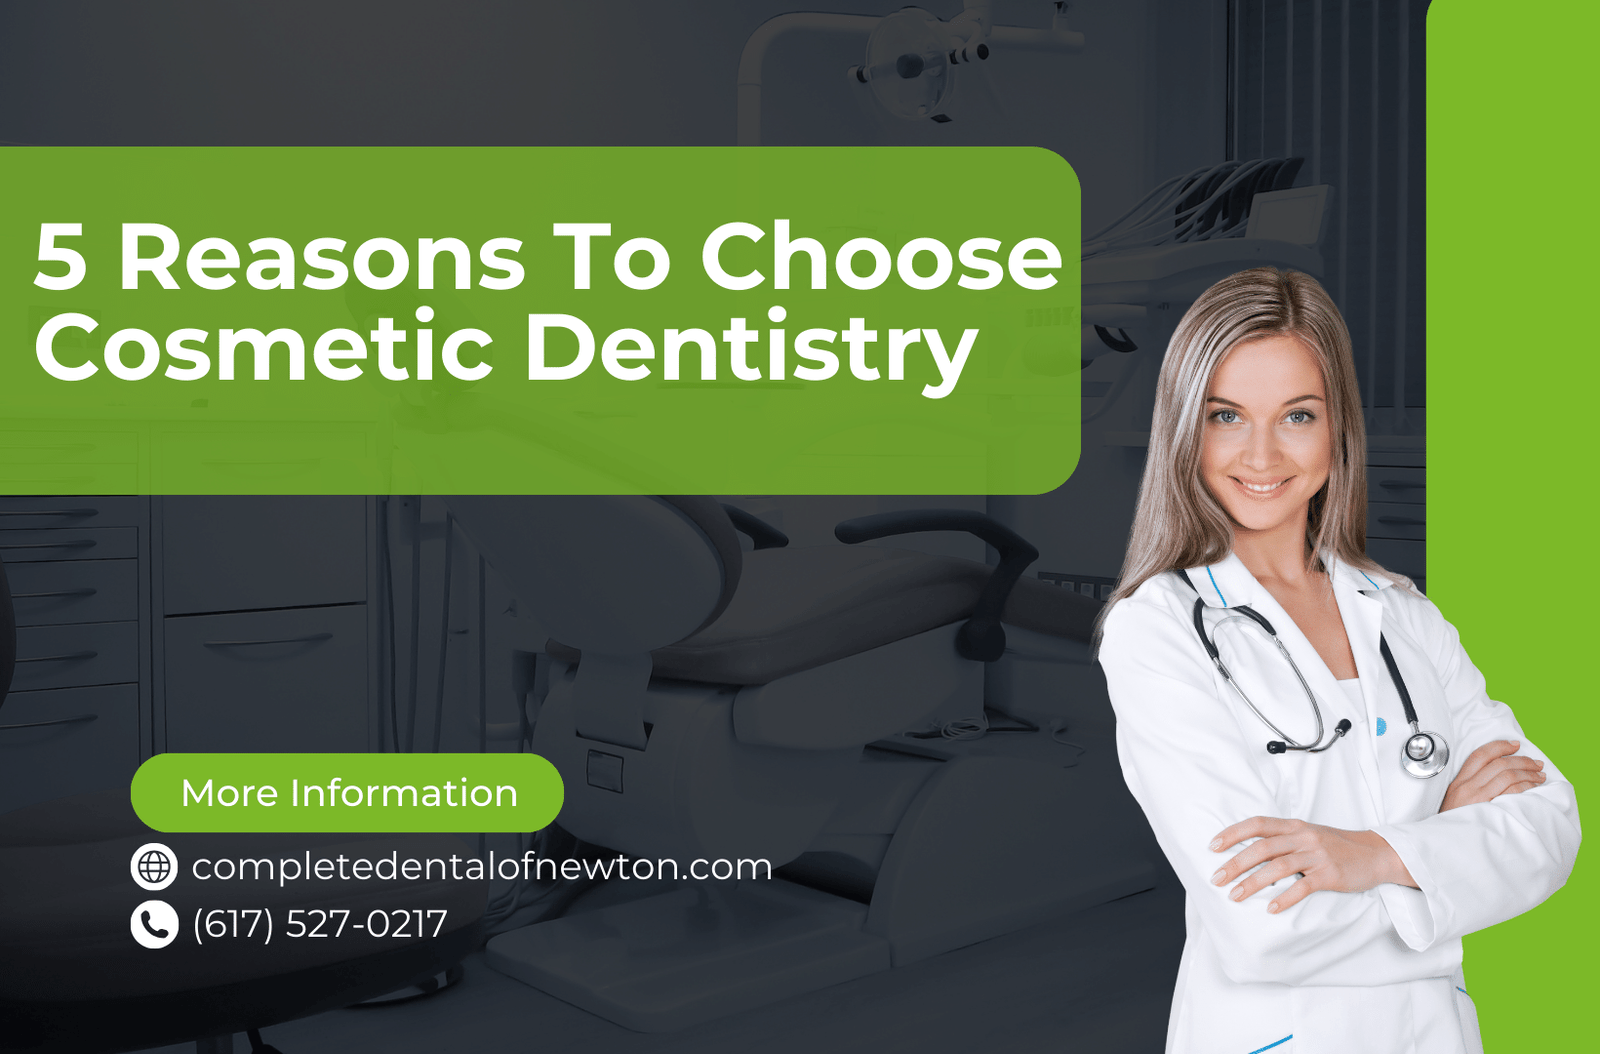 5 Reasons To Choose Cosmetic Dentistry